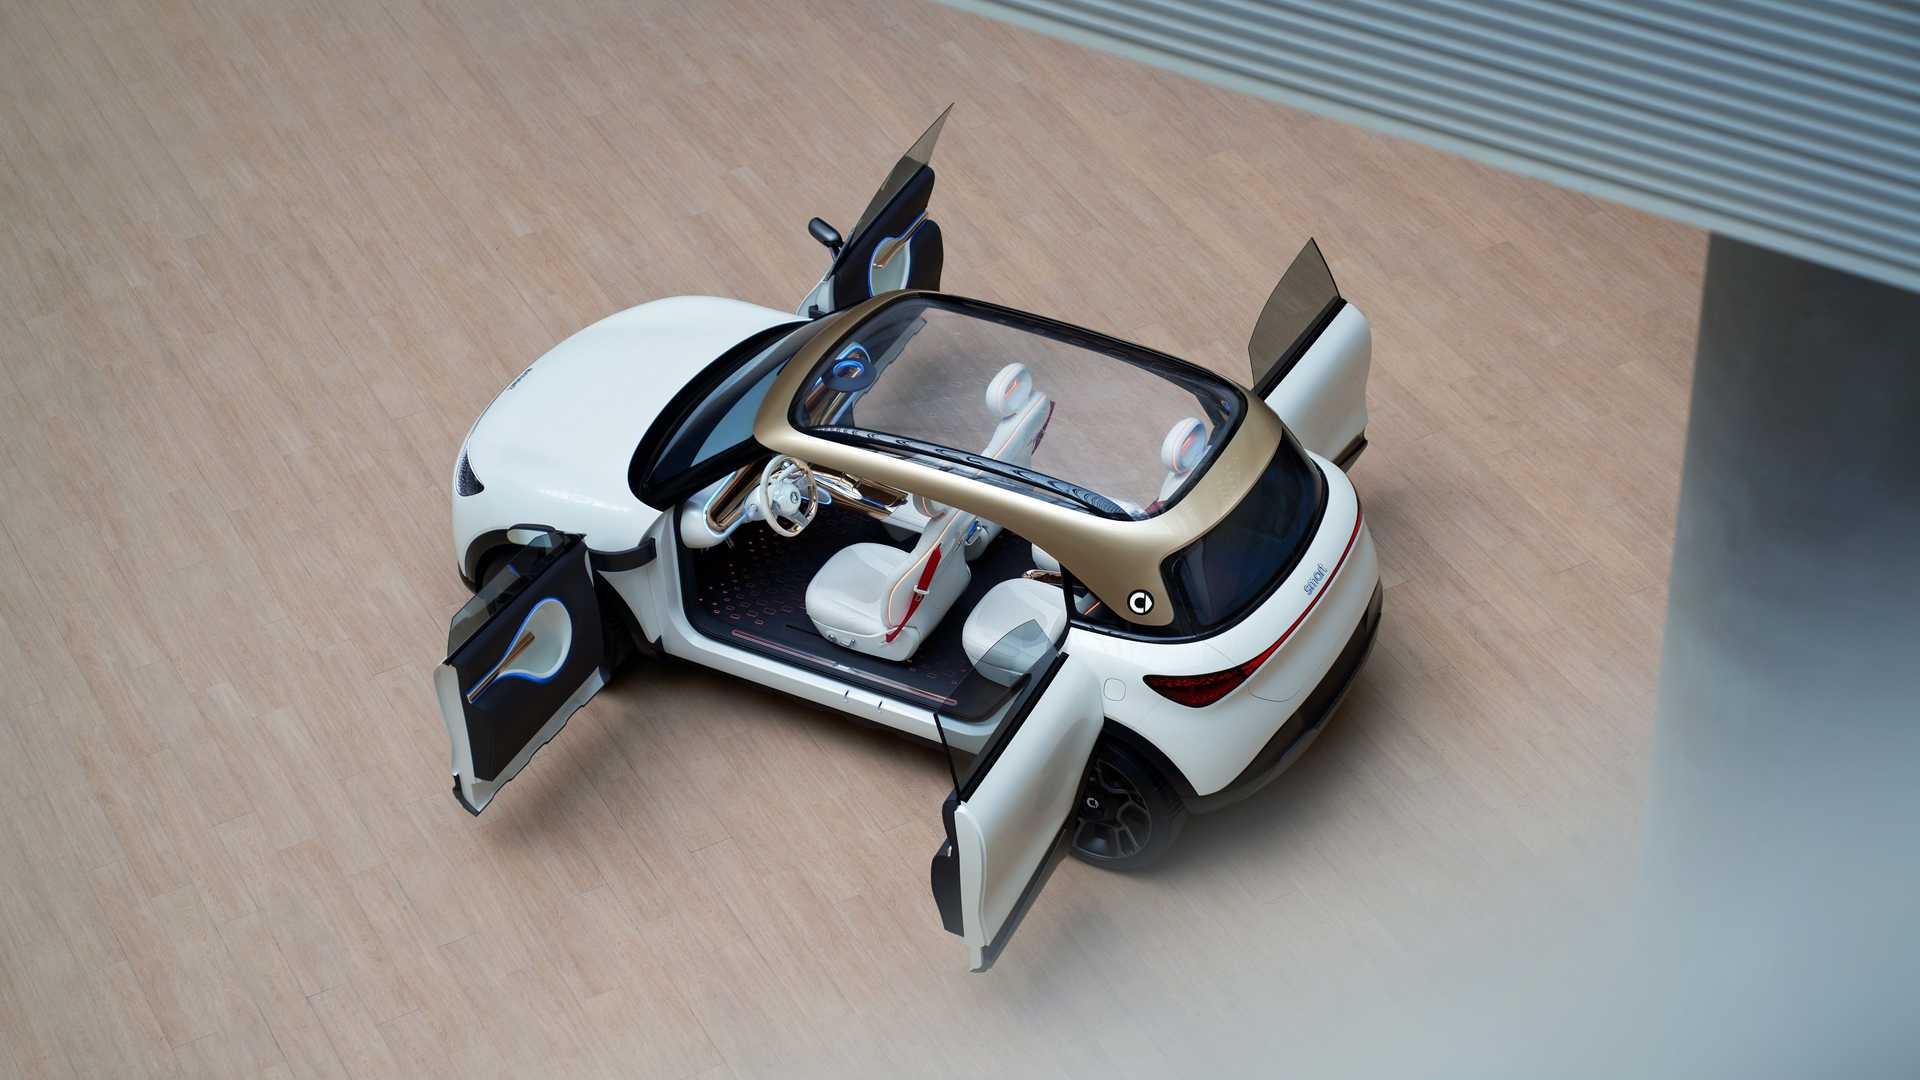 Smart's Mini-like EV concept shows off its larger vehicle ambitions | DeviceDaily.com